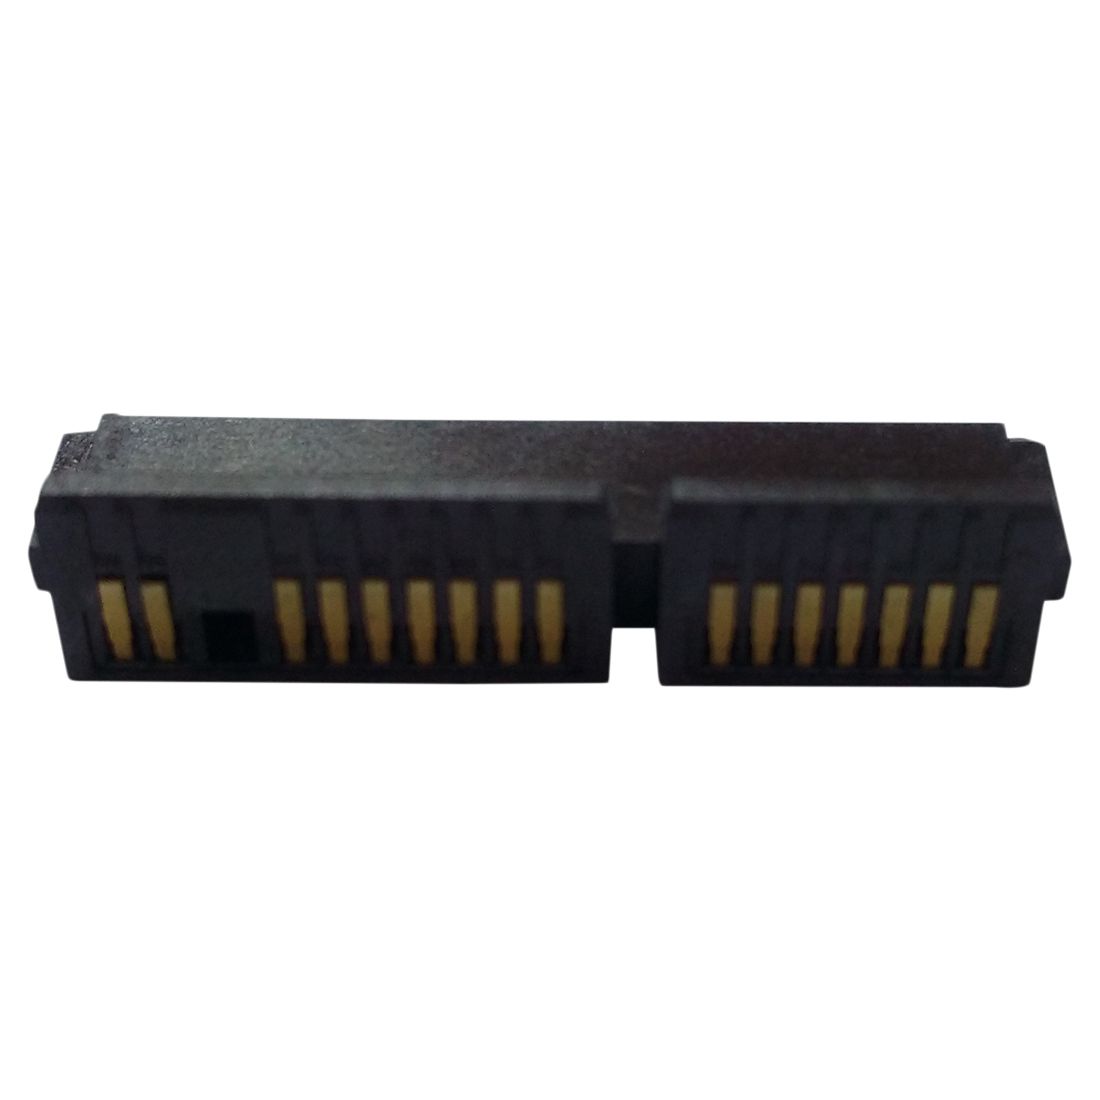 for HP 2540p Hard Disk Drive Interposer Adapter Connector SATA